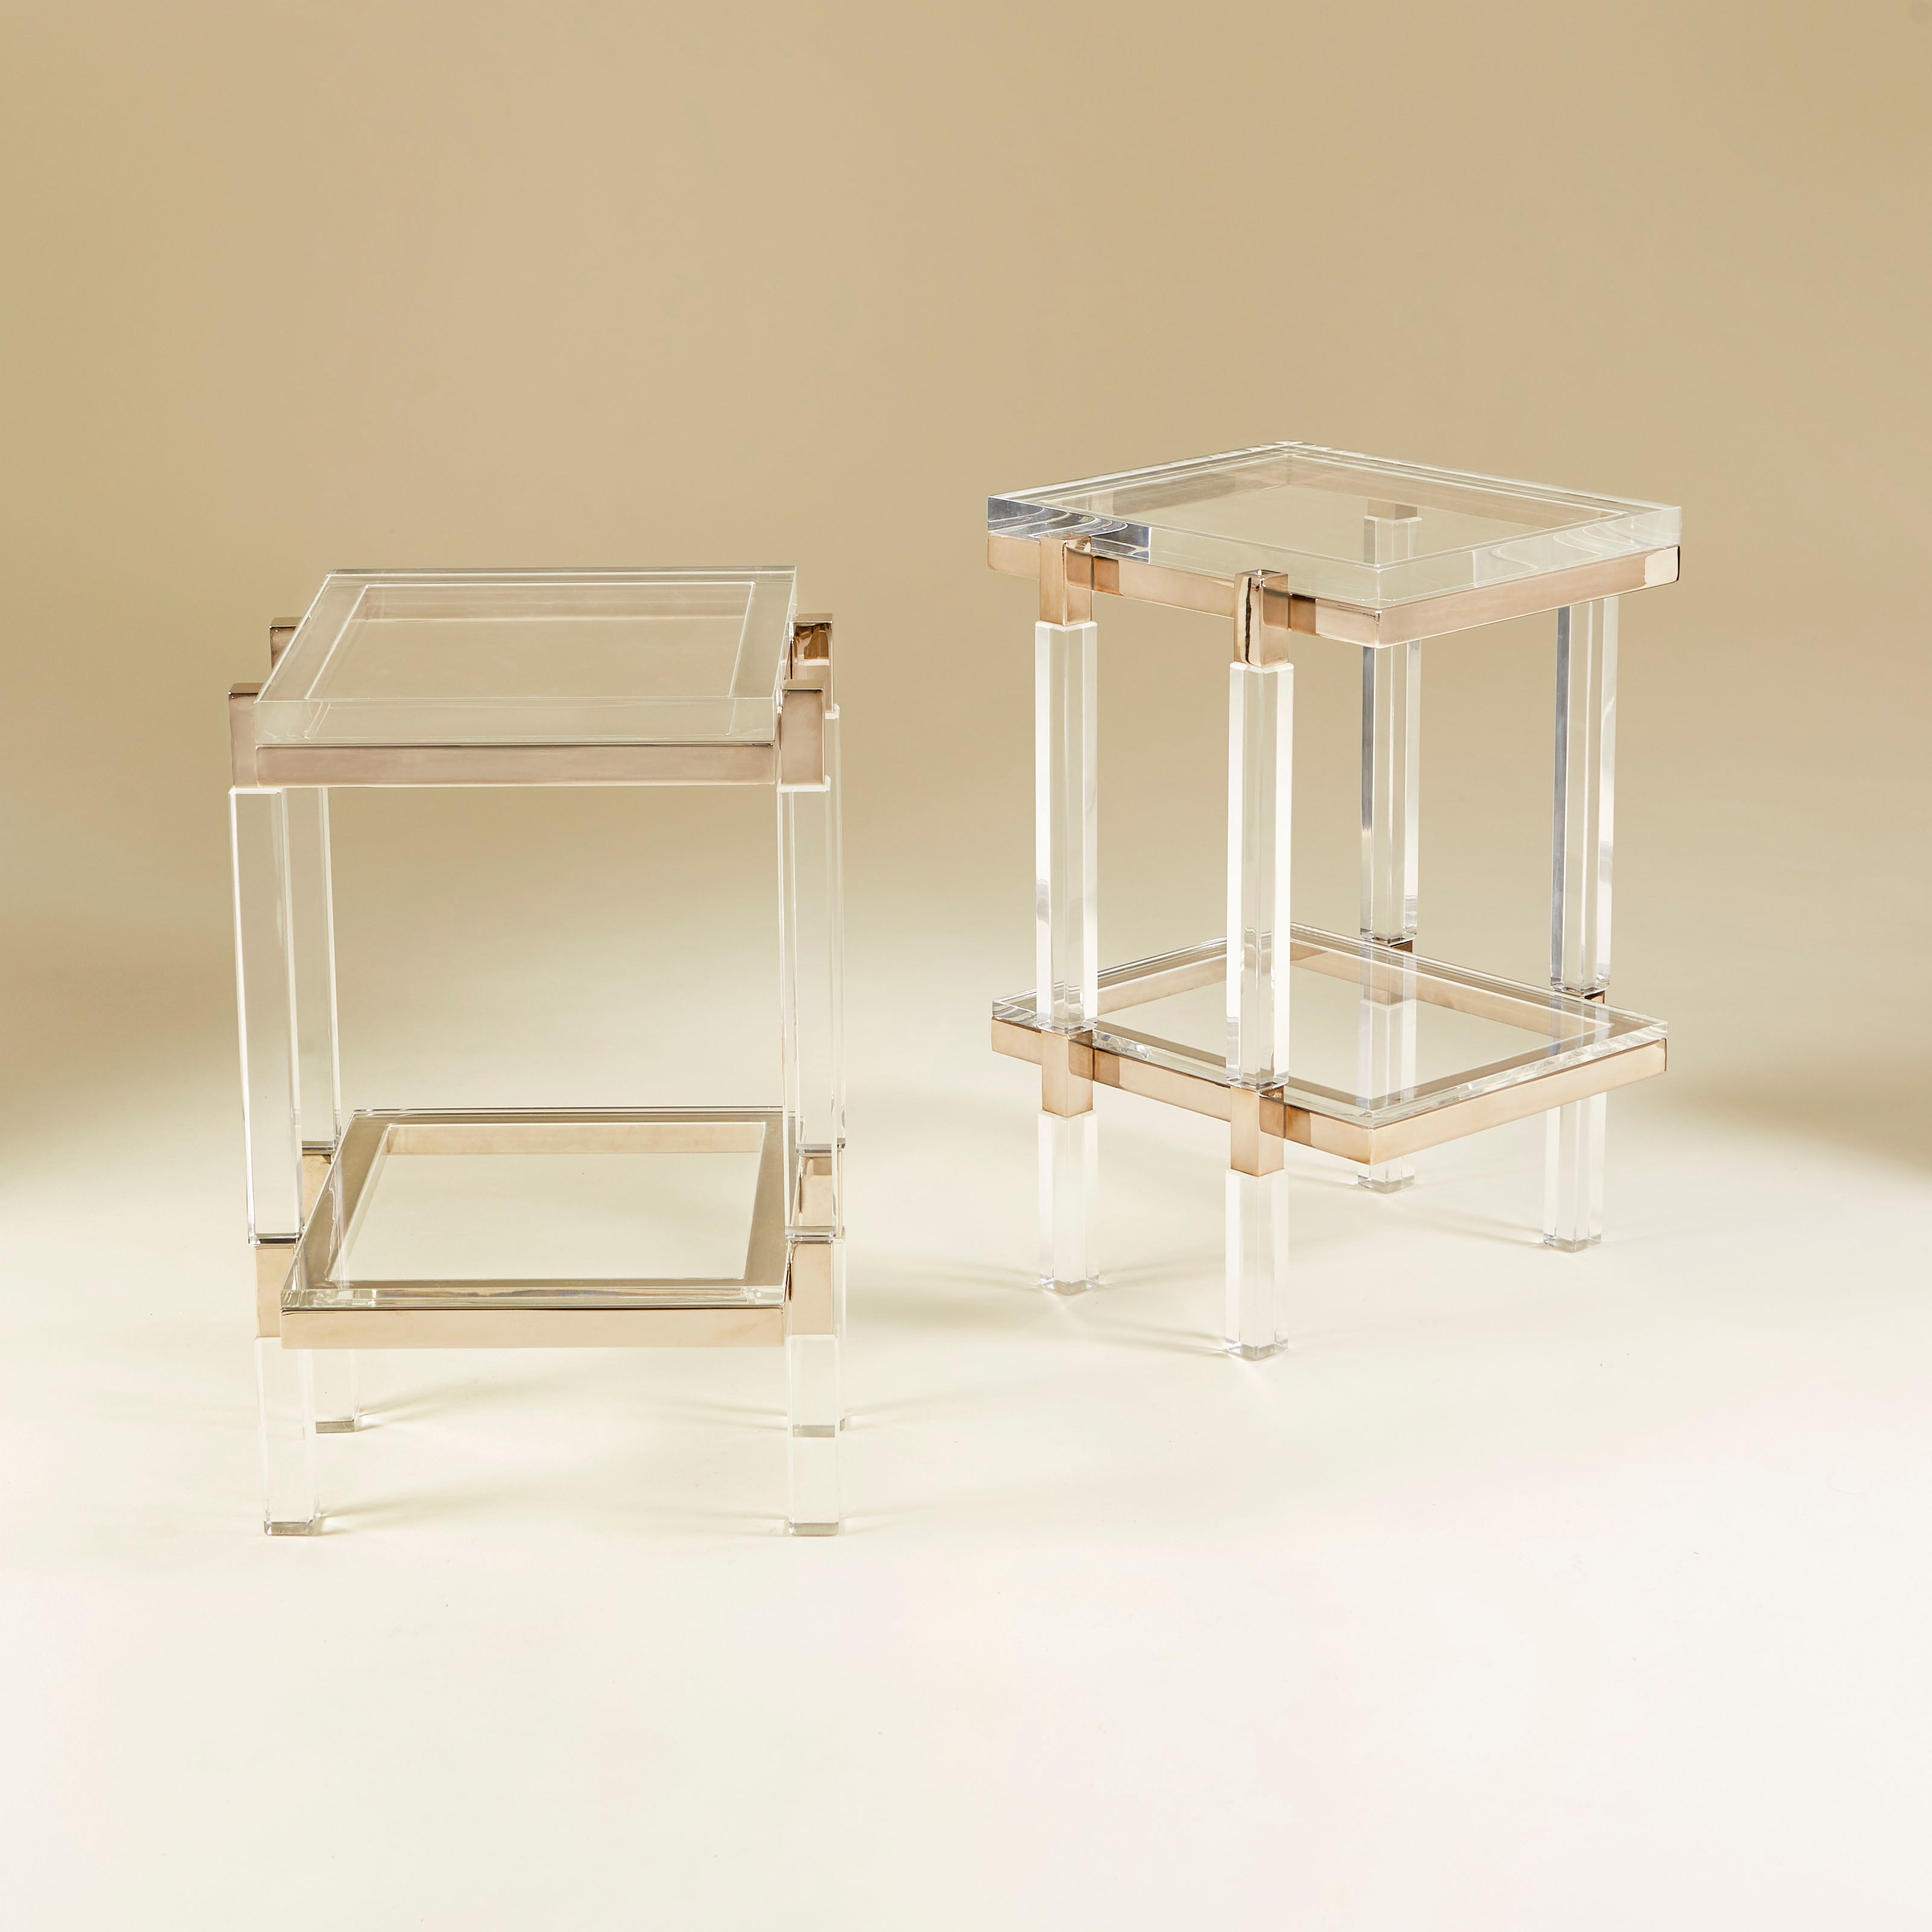 Wonderful pair of two-tier side tables with thick Lucite shelves and chic polished nickel detail. Designed in the 1960s by Charles Hollis Jones as part of his Metric collection. Signed Charles Hollis Jones.

Charles Hollis Jones (born 1945) is an